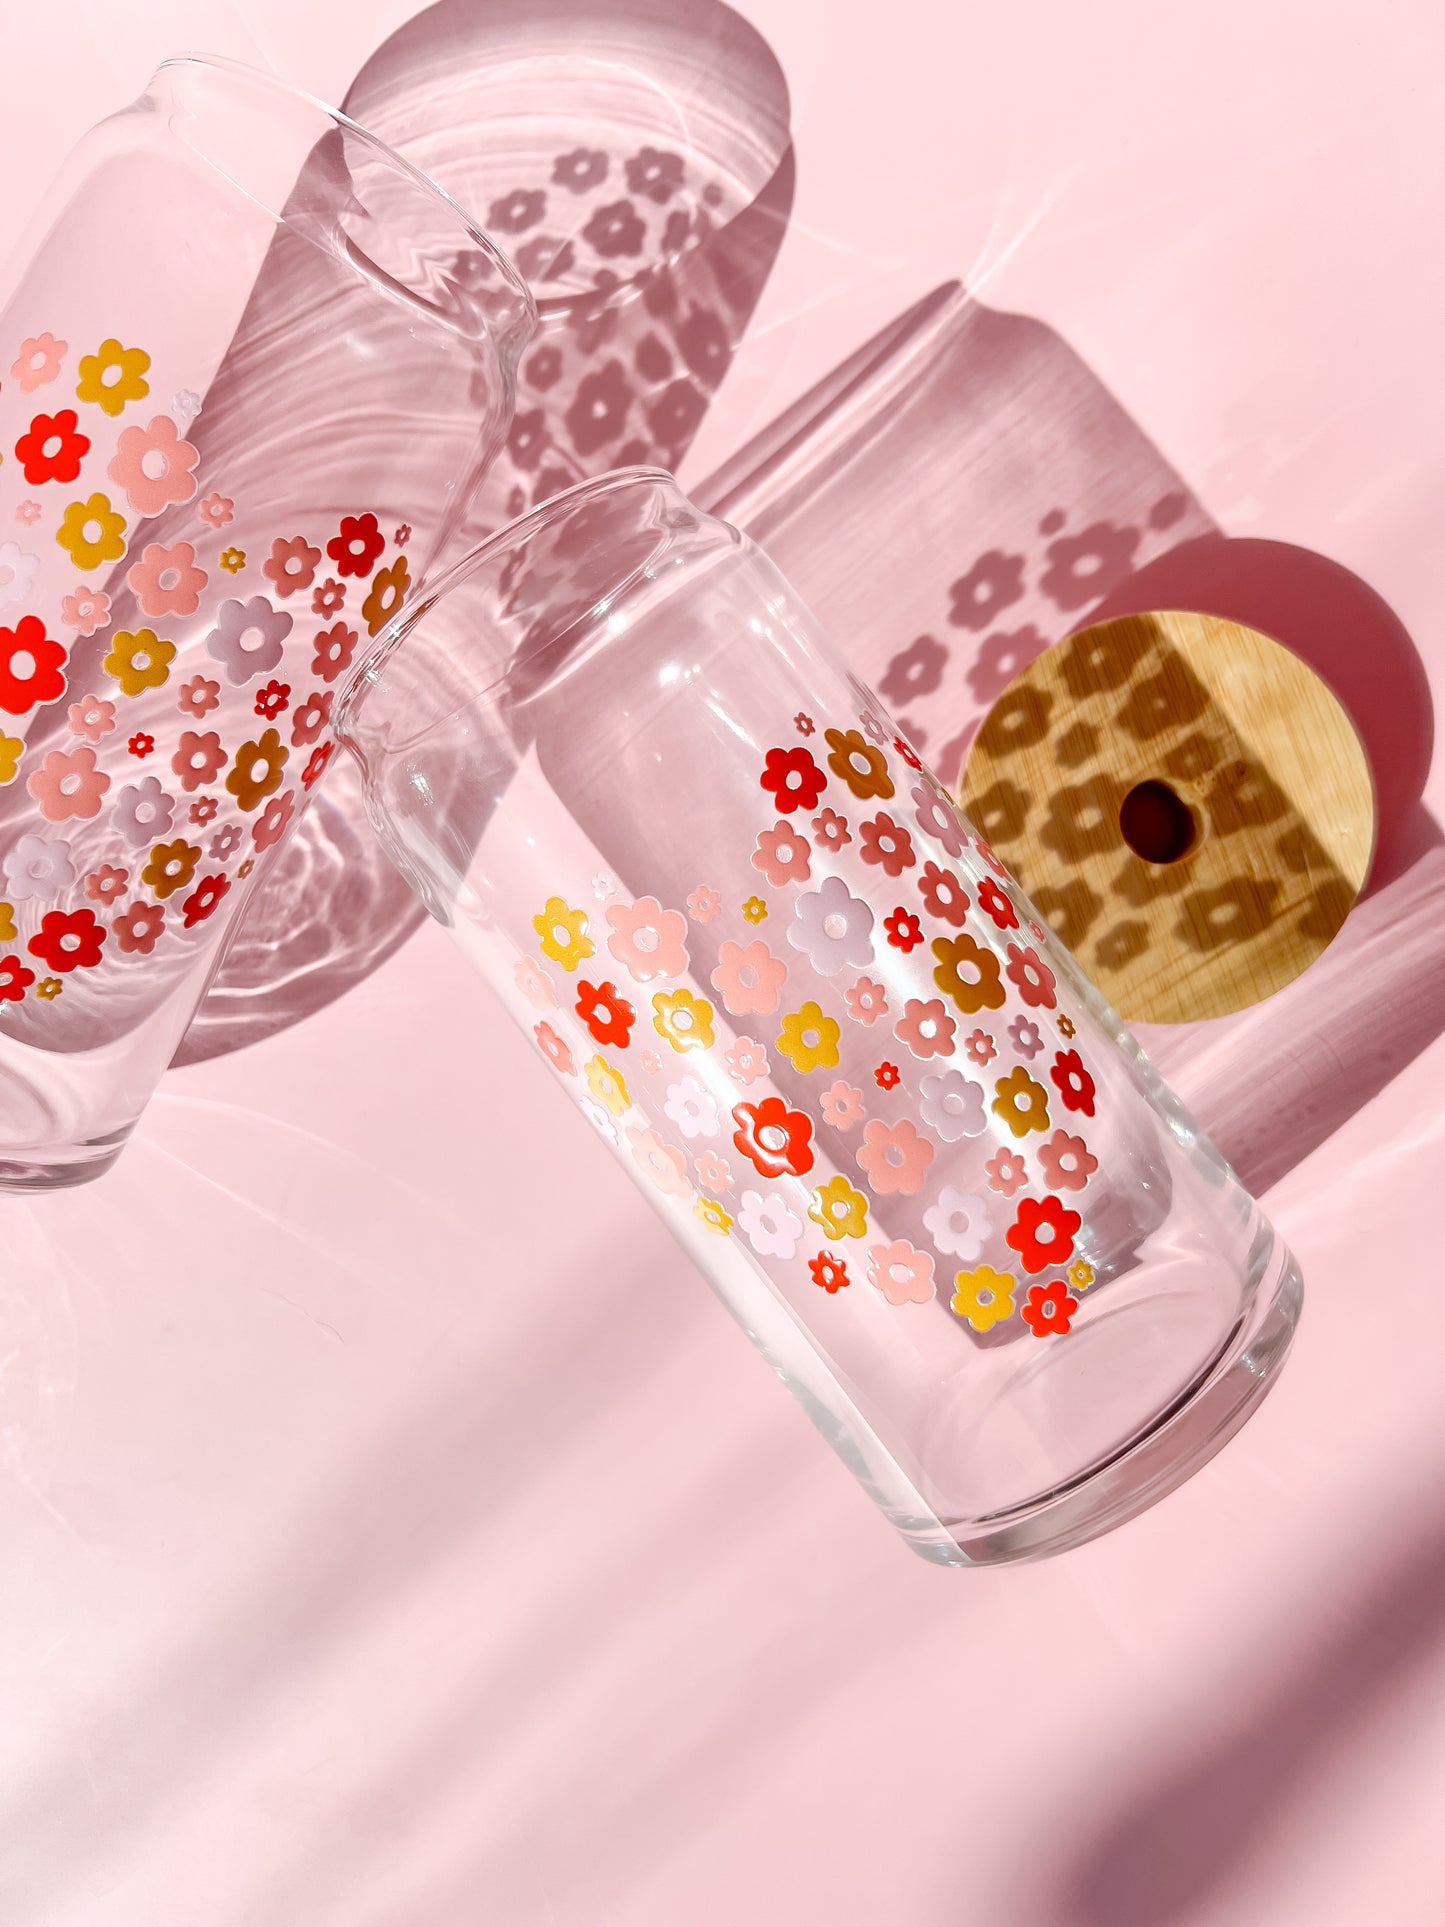 Floral Hearts 20oz Glass Cup